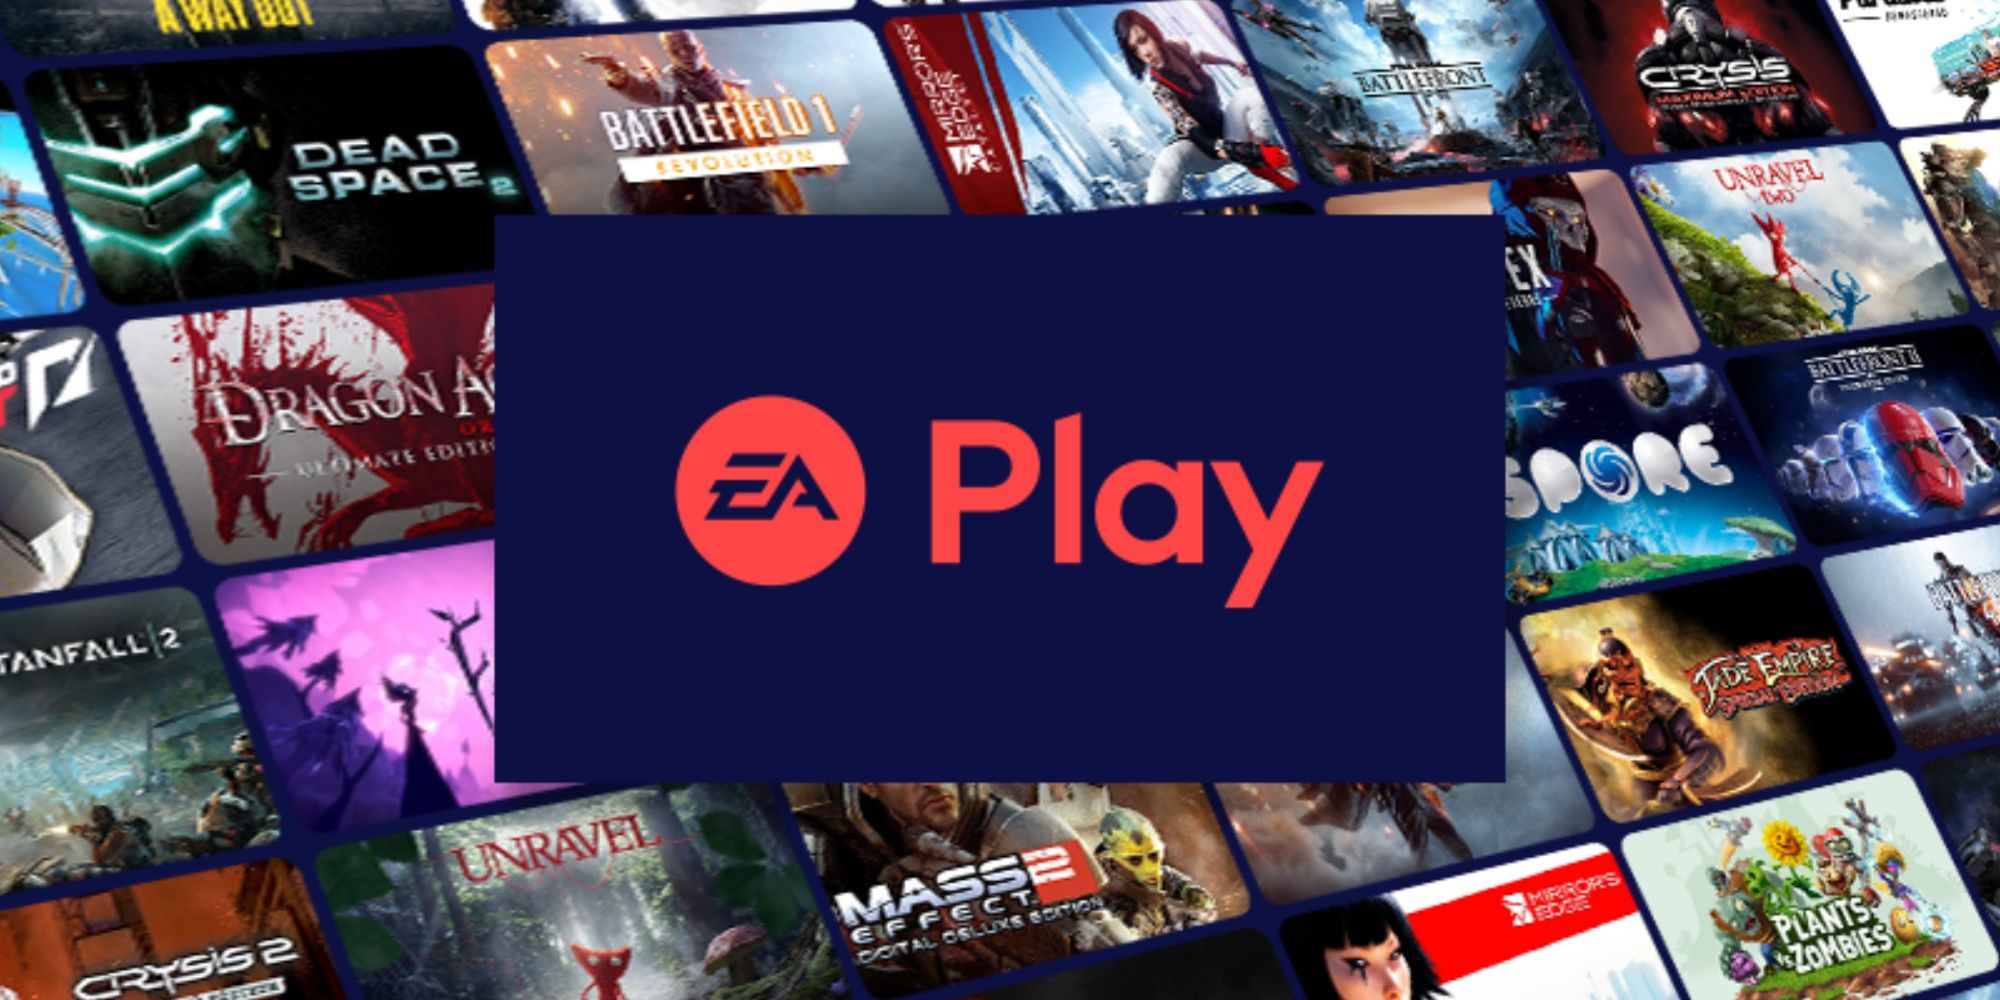 ea play logo and its games in the background